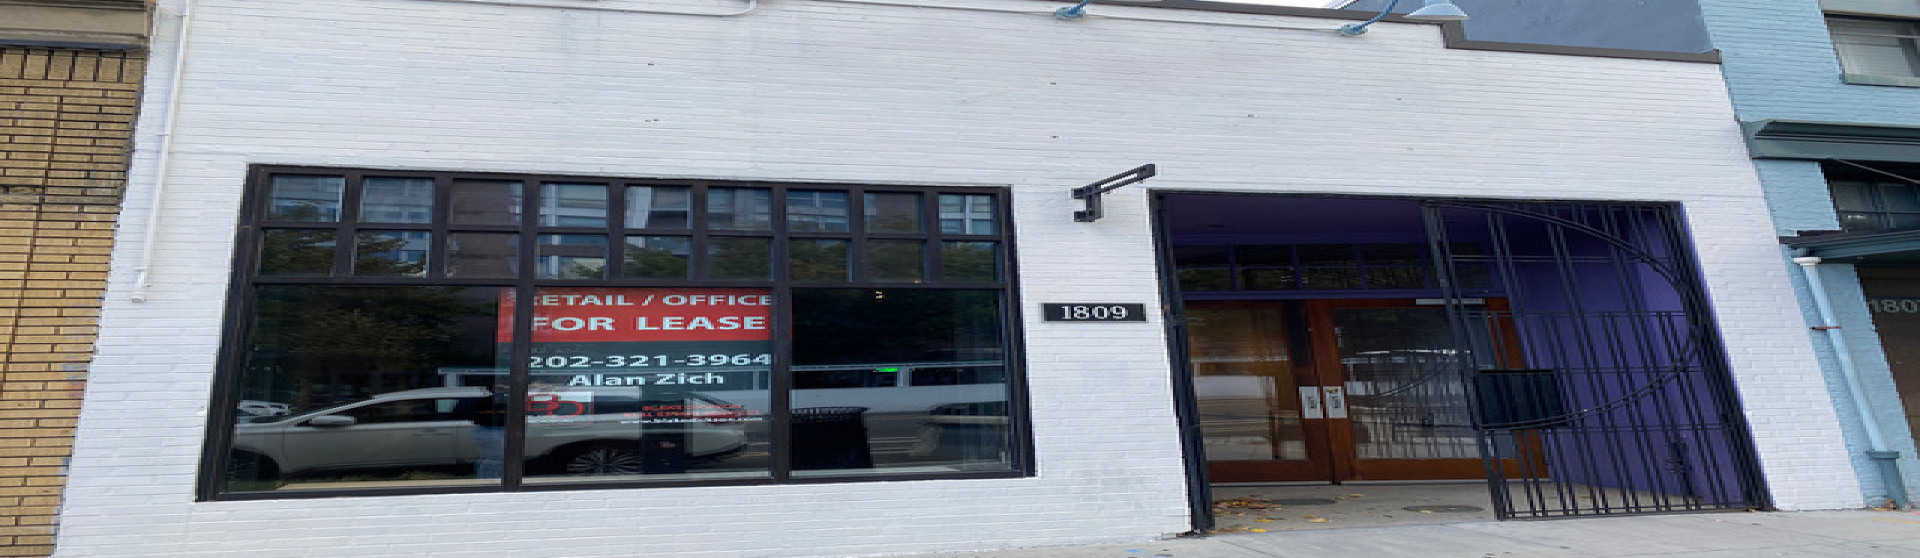 PRIME RETAIL SPACE FOR LEASE